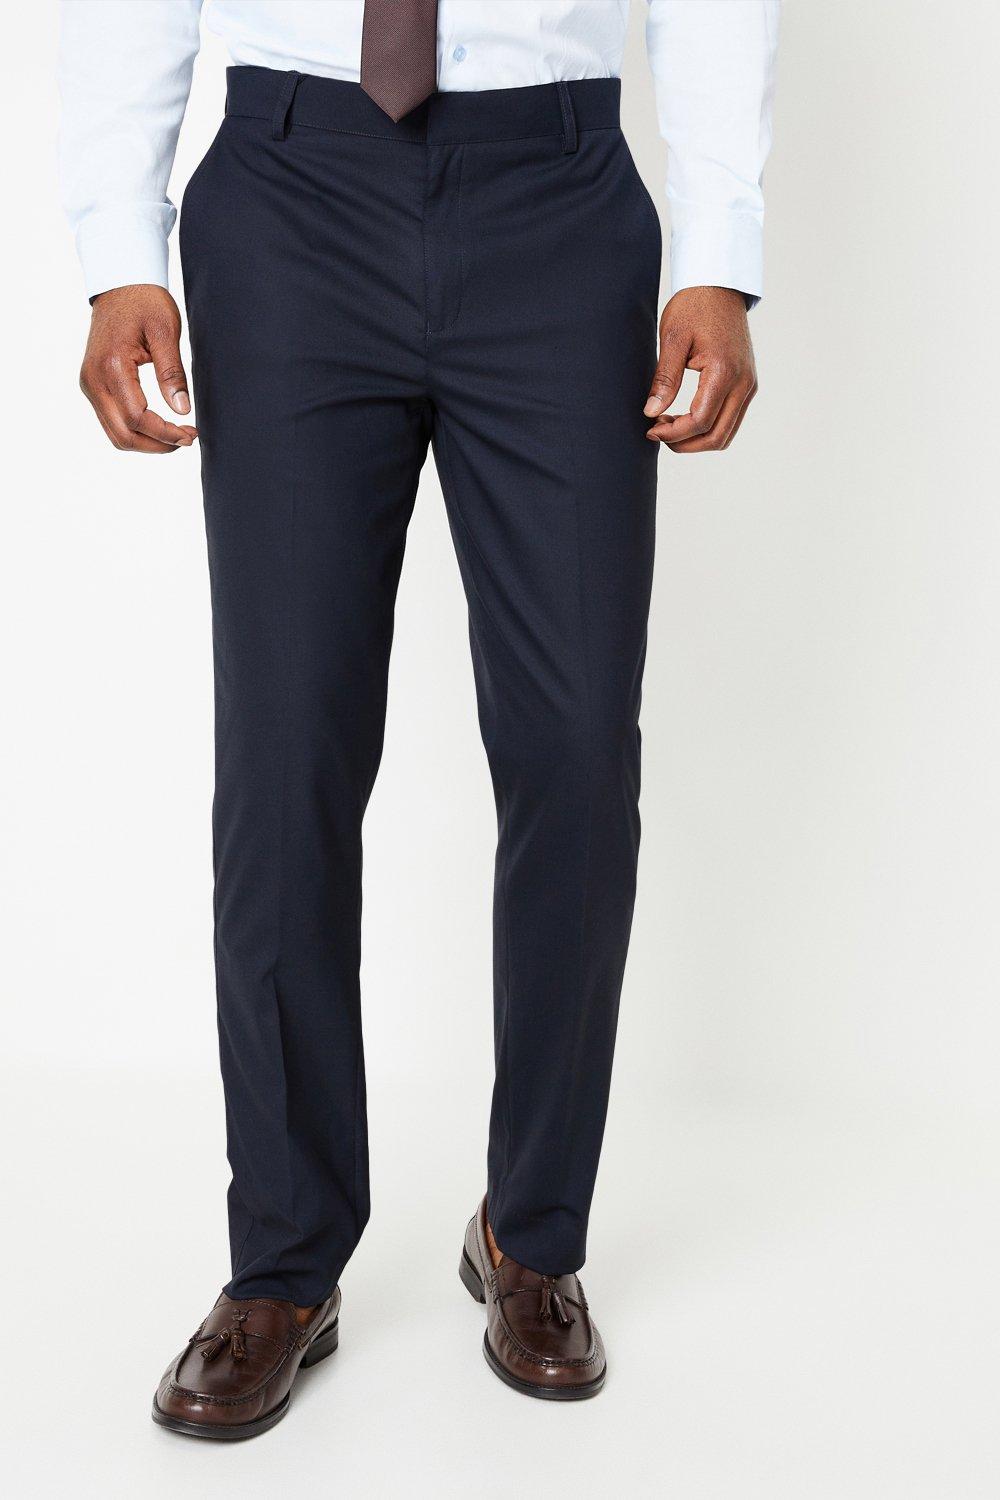 Mens Tailored Fit Smart Trouser from Burton